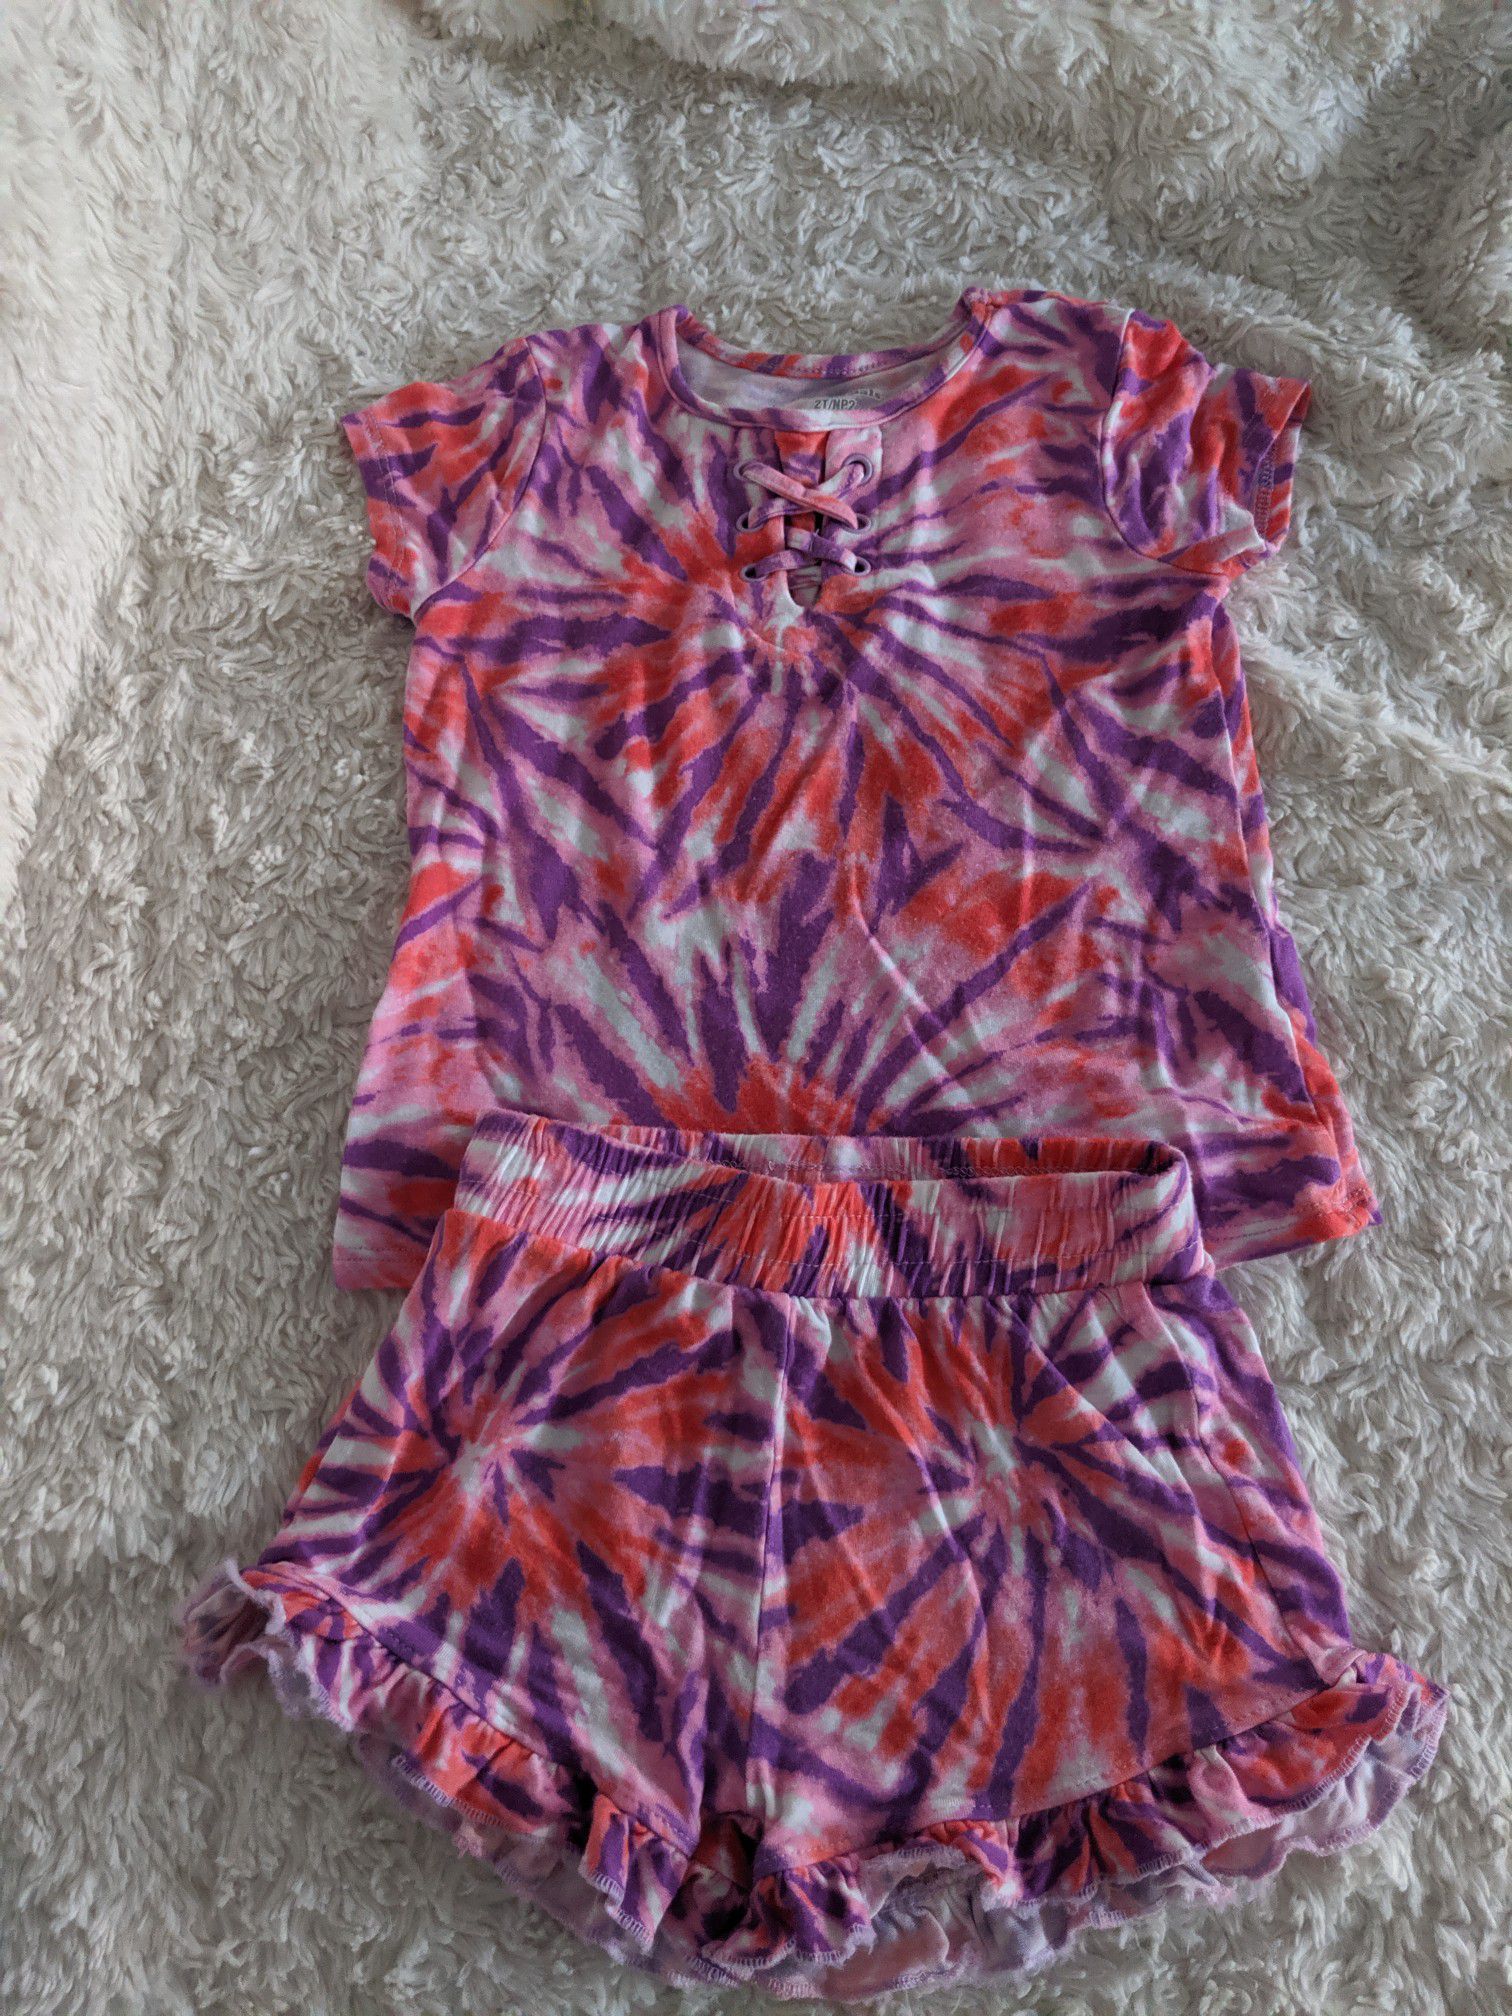 Cute tie dye shirt and short outfit size 2T